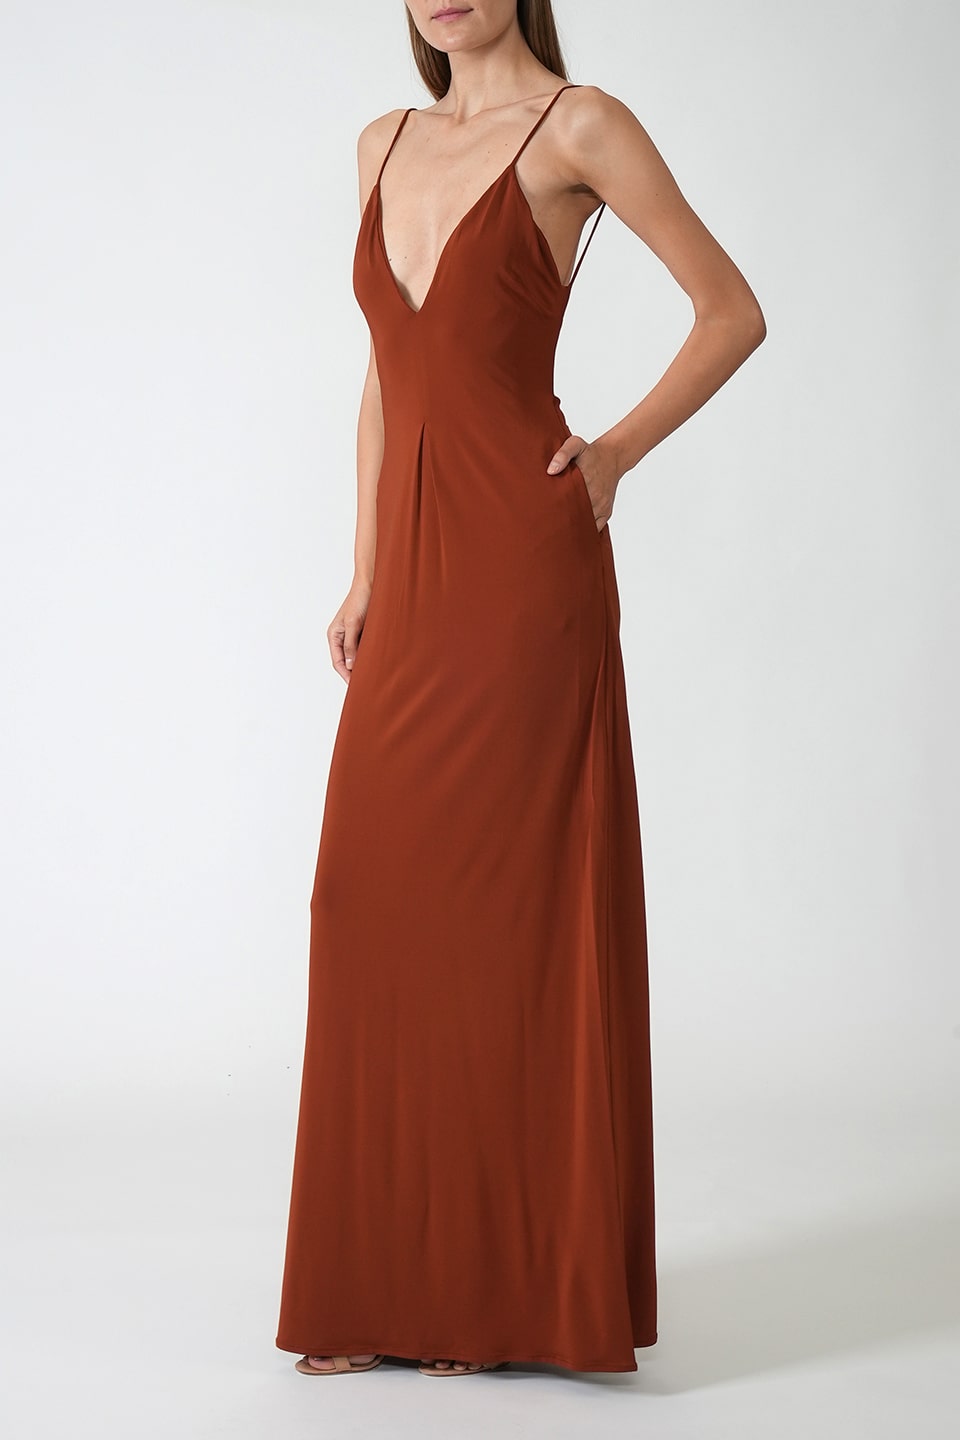 Thumbnail for Product gallery 2, Backless Long Dress Bronze